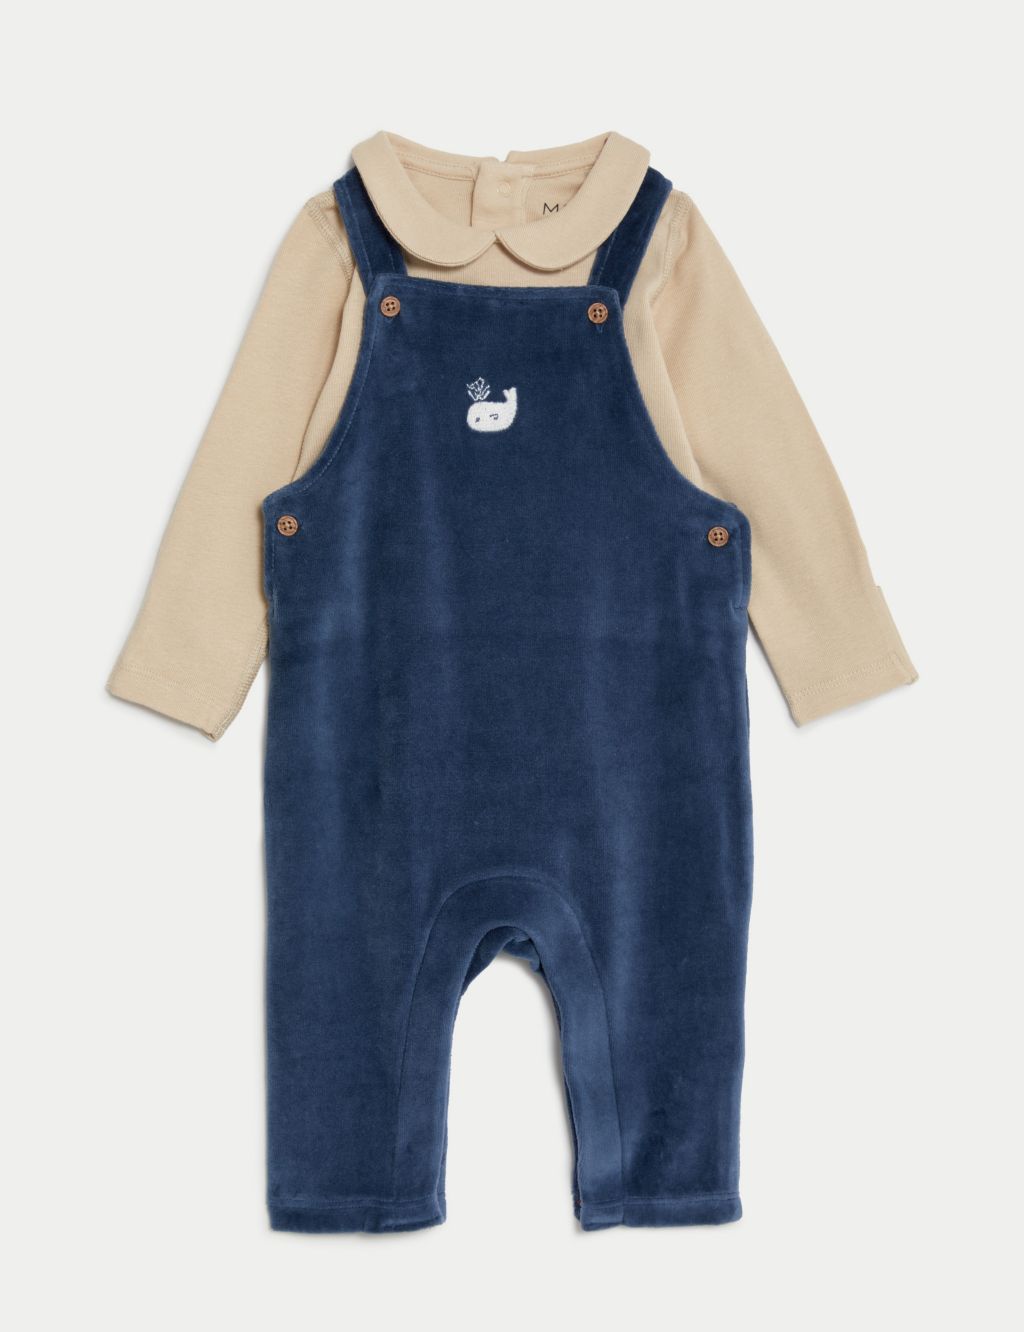 2pc Cotton Rich Whale Outfit (7lbs-1 Yrs) image 1